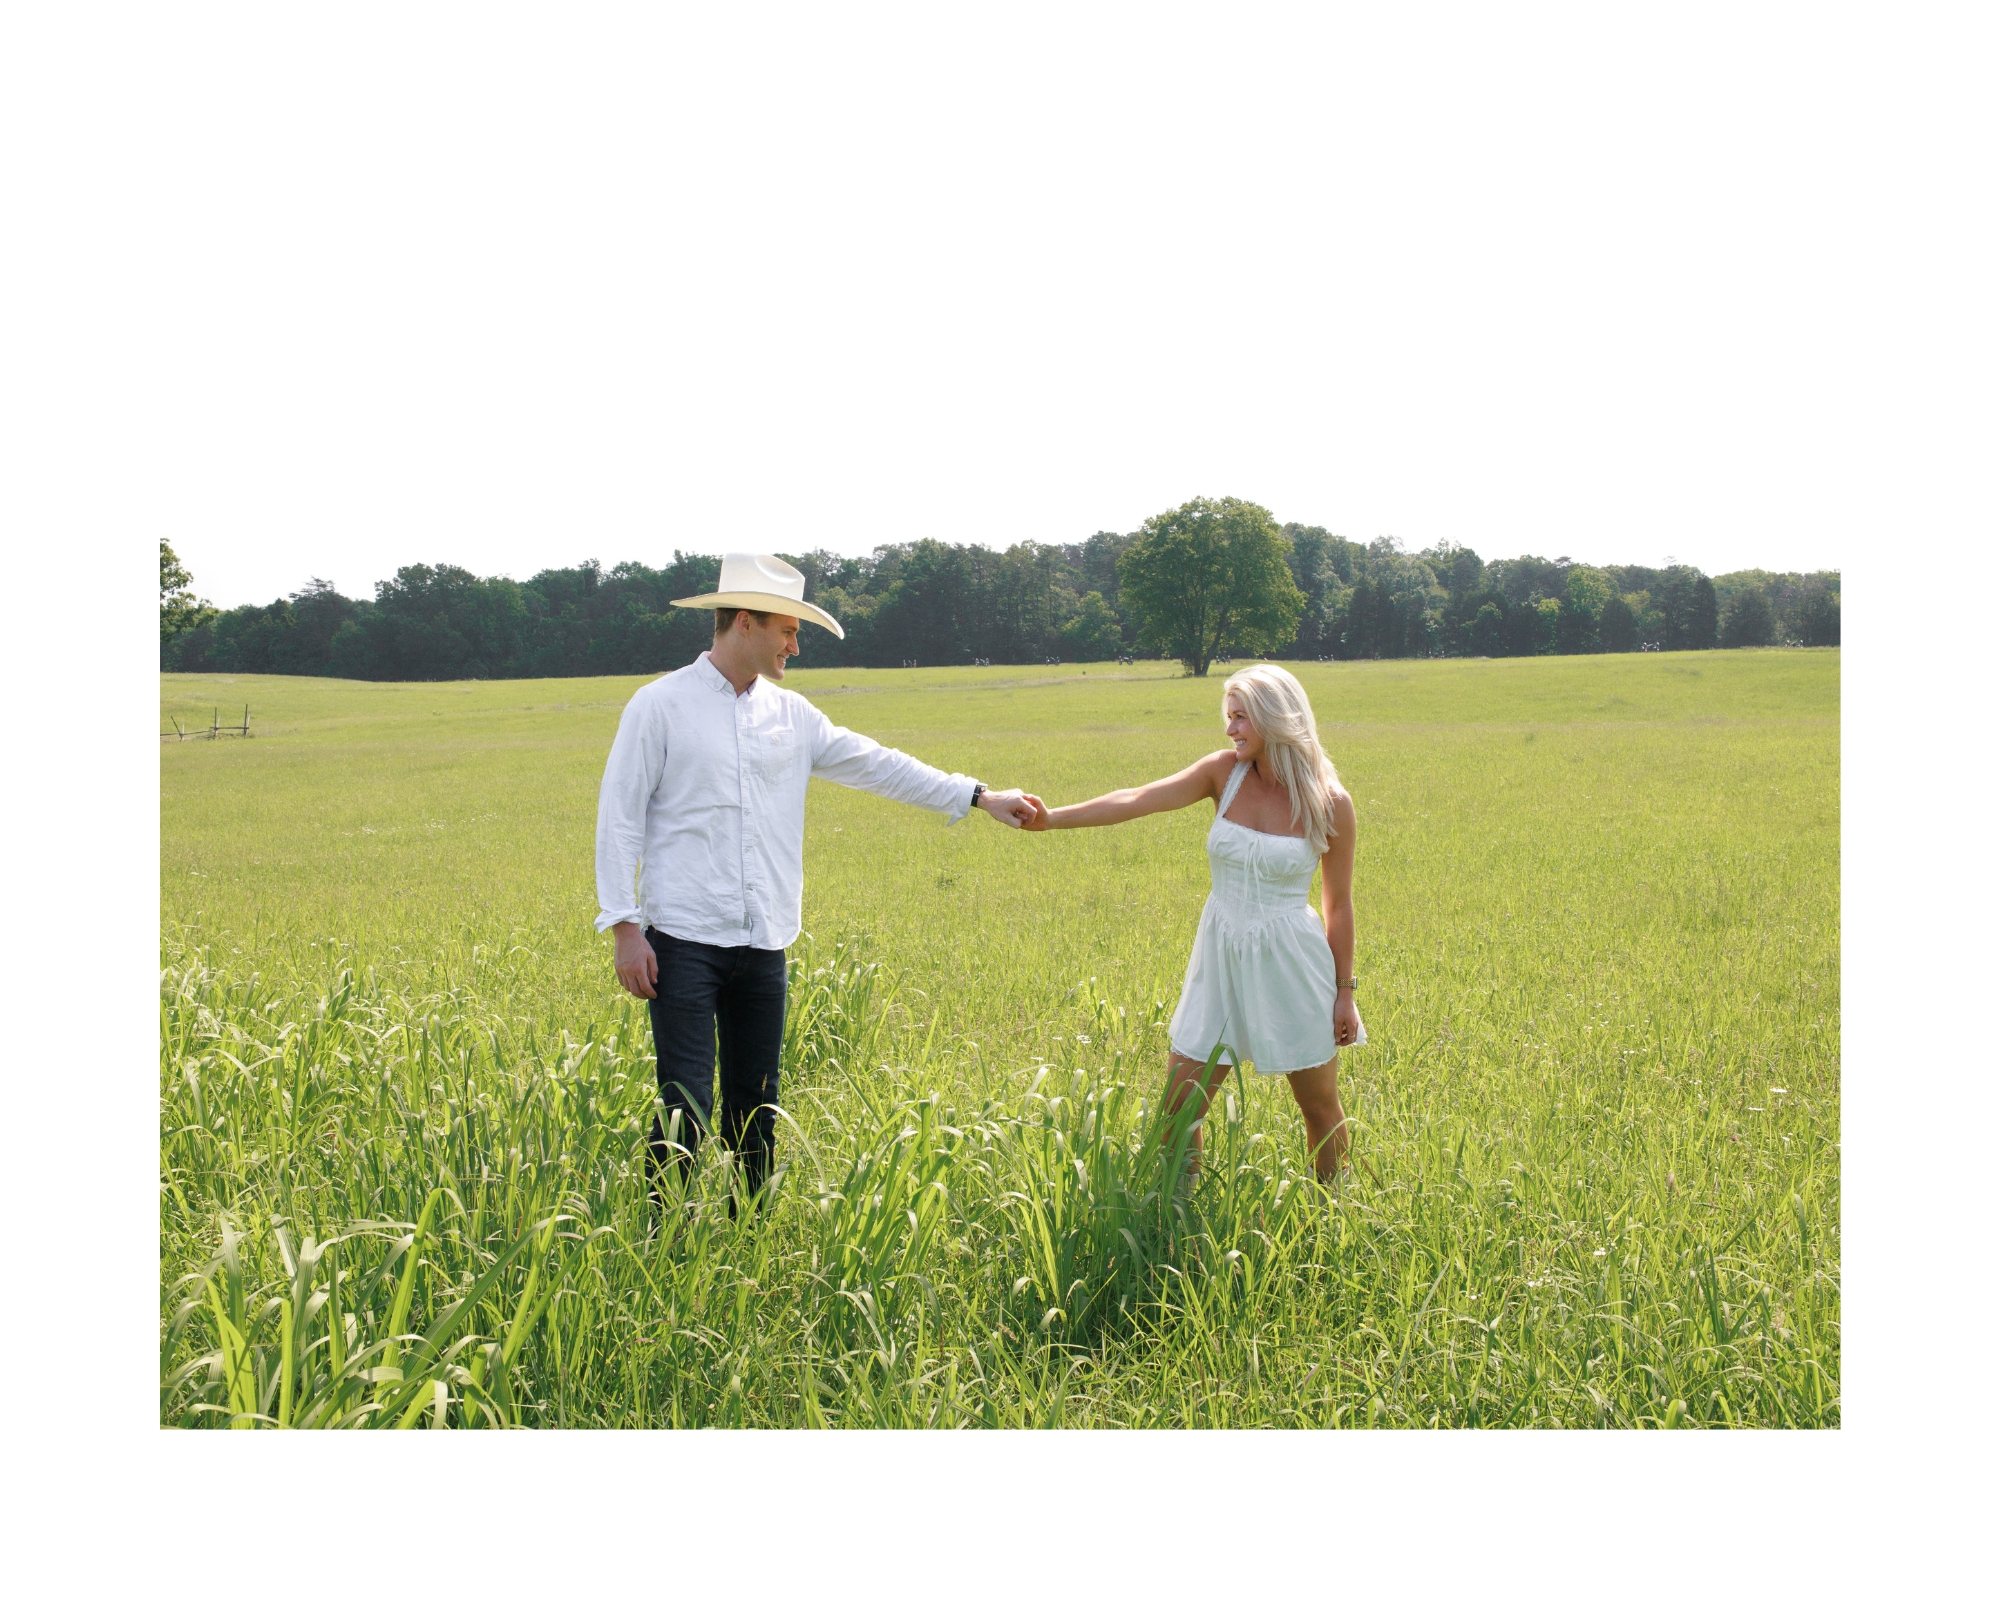 Manassas Battlefield Engagement Session Photography by Alex McCormick Photography